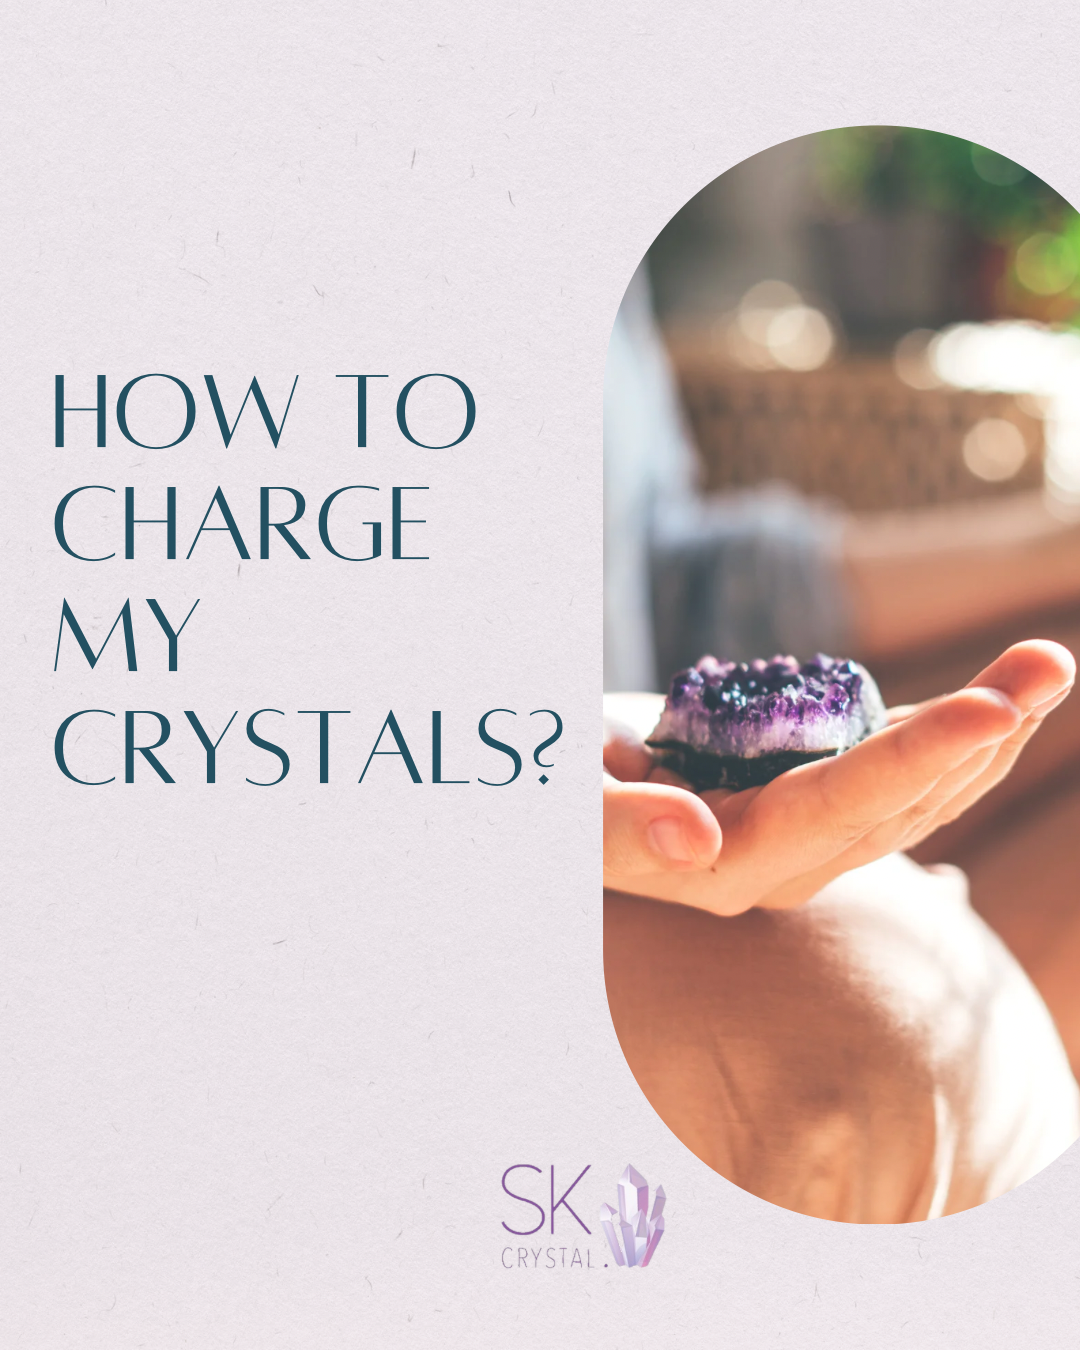 How to charge my crystals?